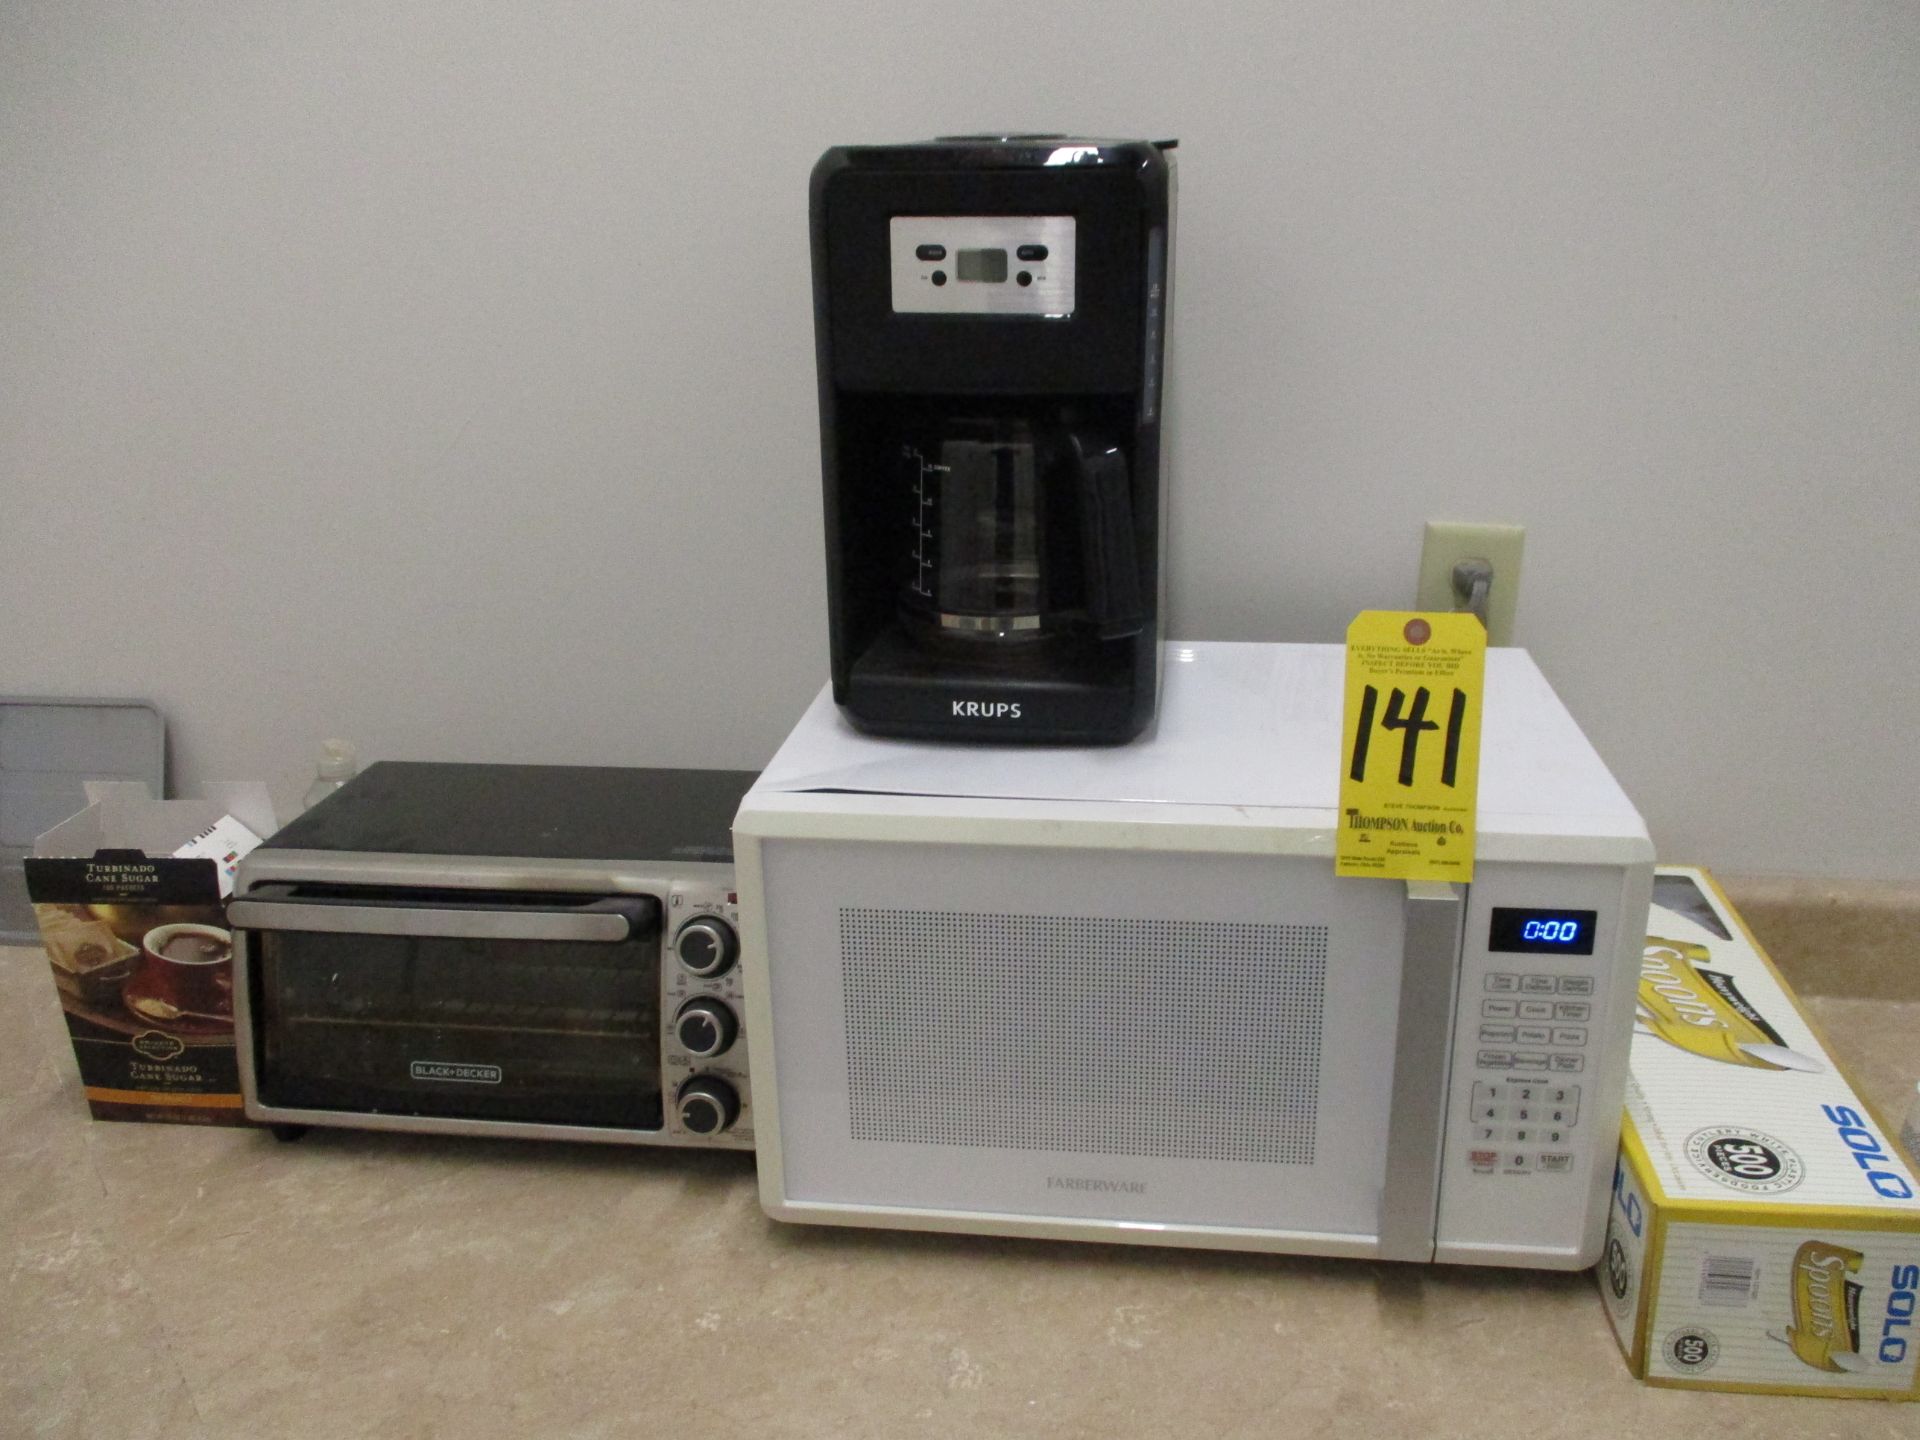 Krups Coffee Maker, Farberware Microwave, and Black and Decker Toaster Oven